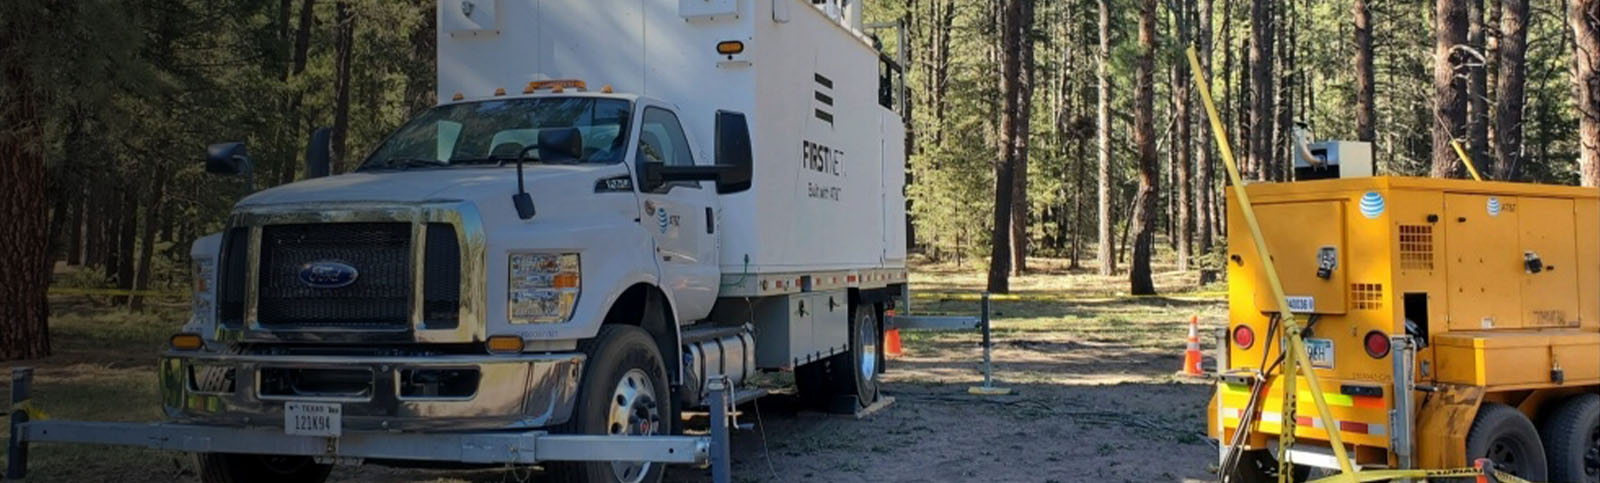 FirstNet, Built with AT&T responding to wildfire in New Mexico